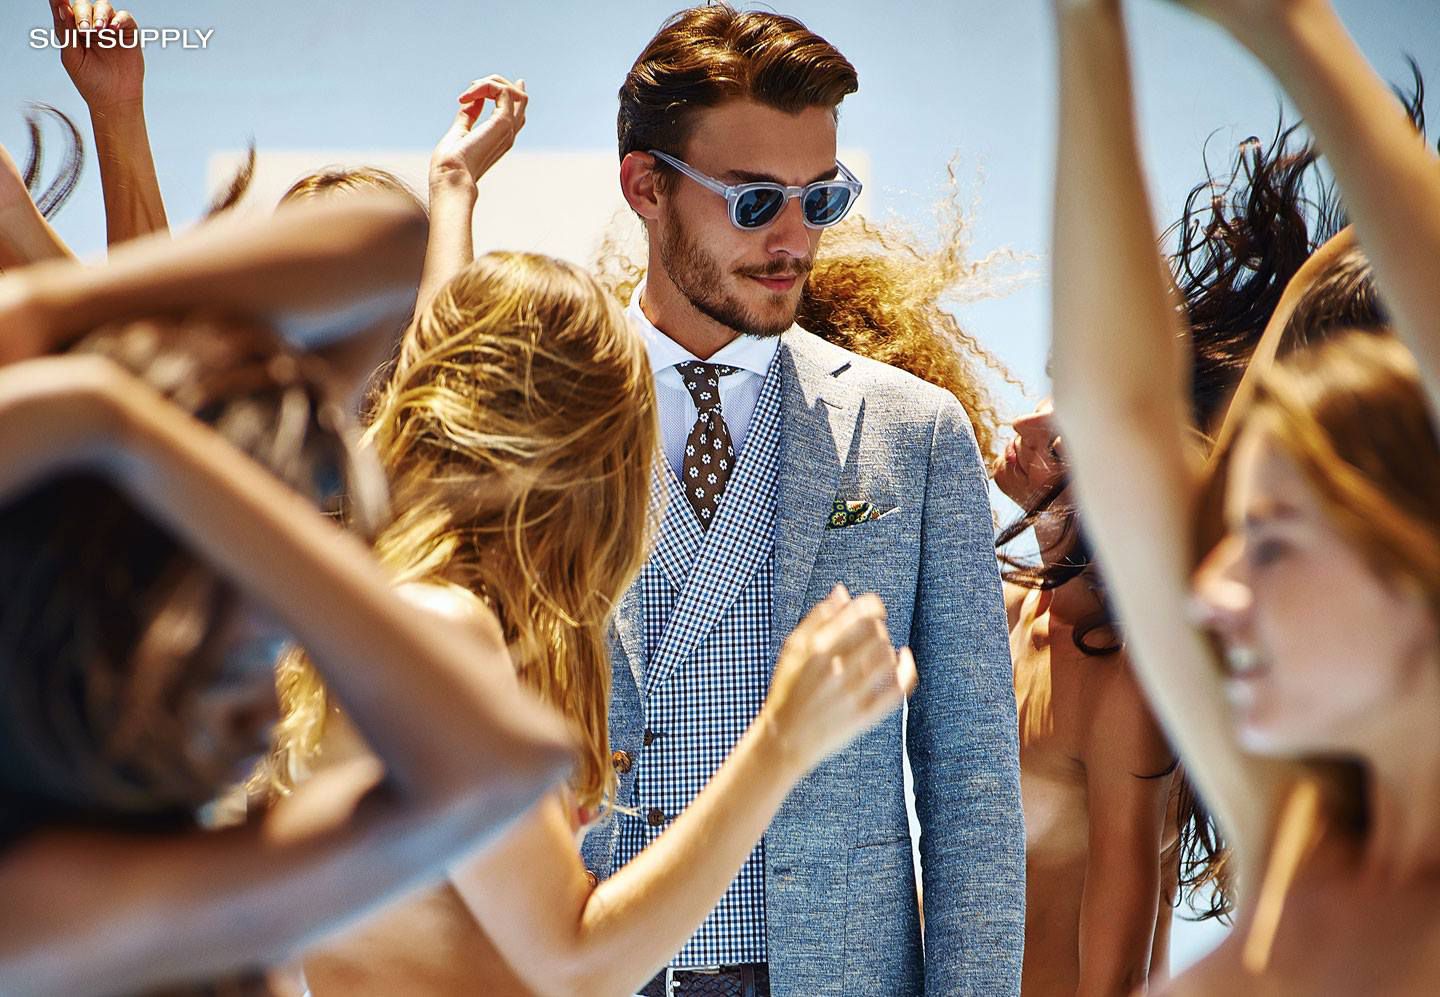 Suitsupply Collection Spring/Summer 2014